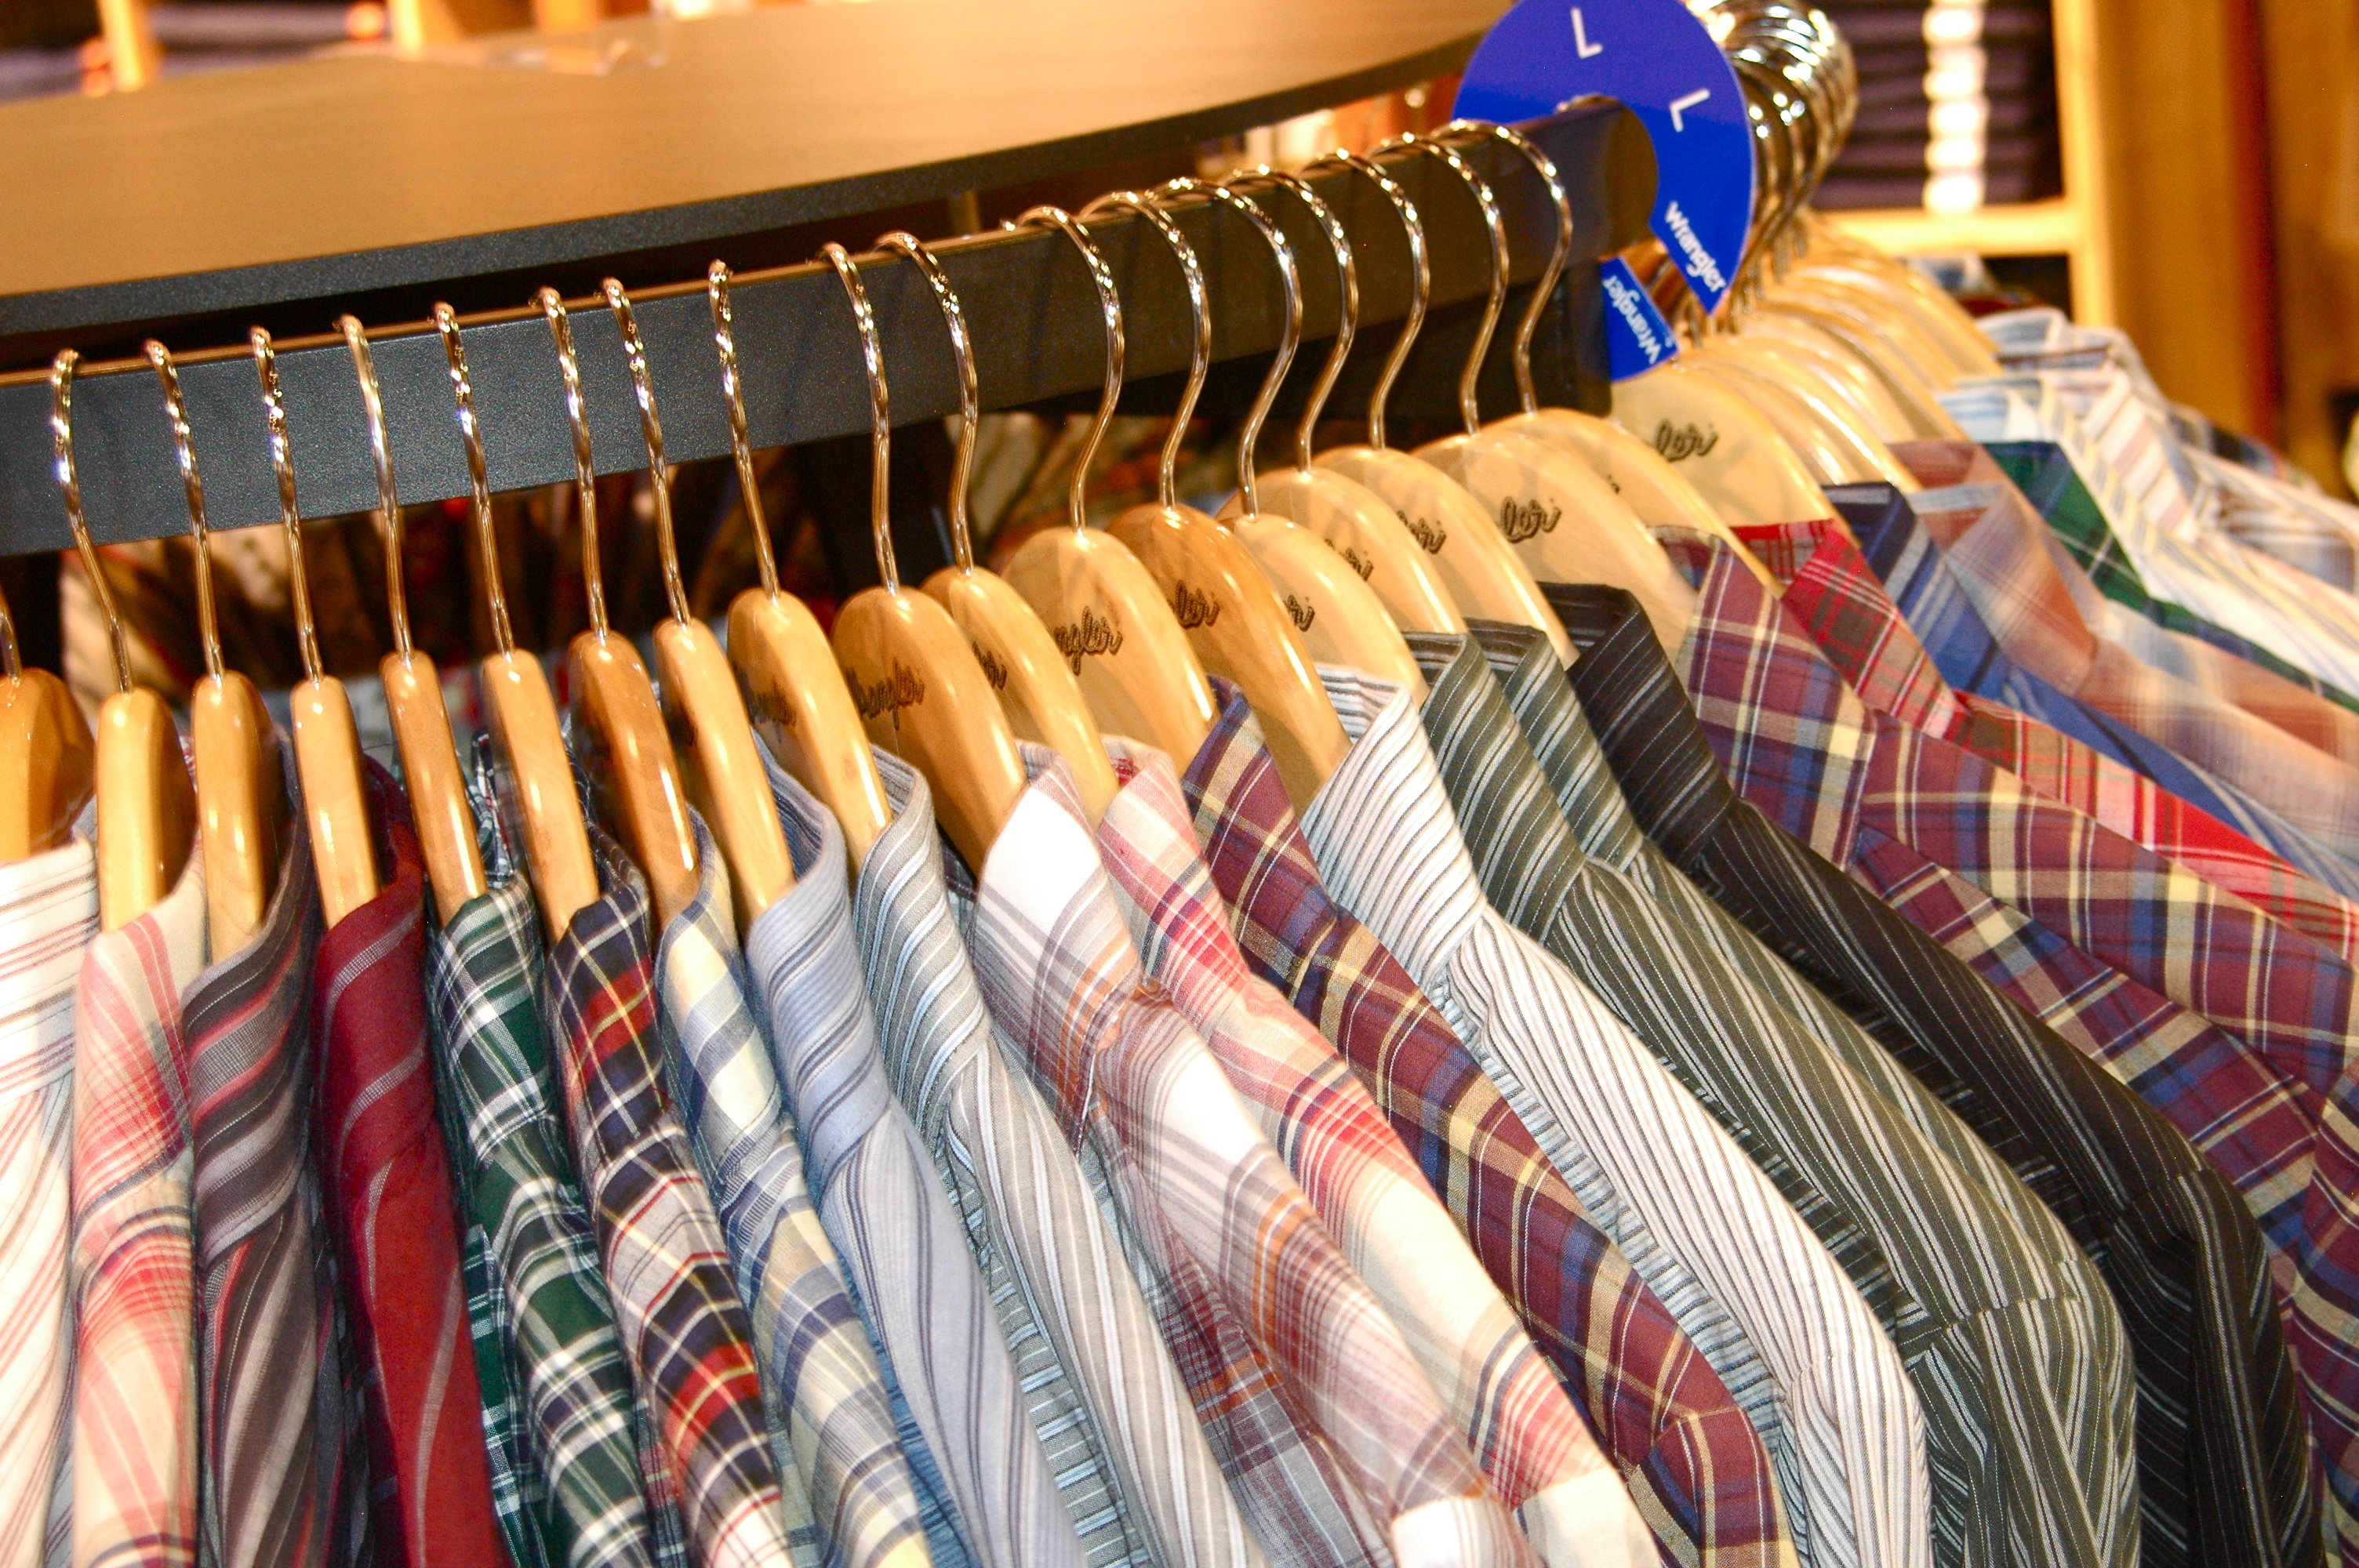 Men's Shirts Hanging on the Rack, Attire, Casual, Clothes, Clothing, HQ Photo